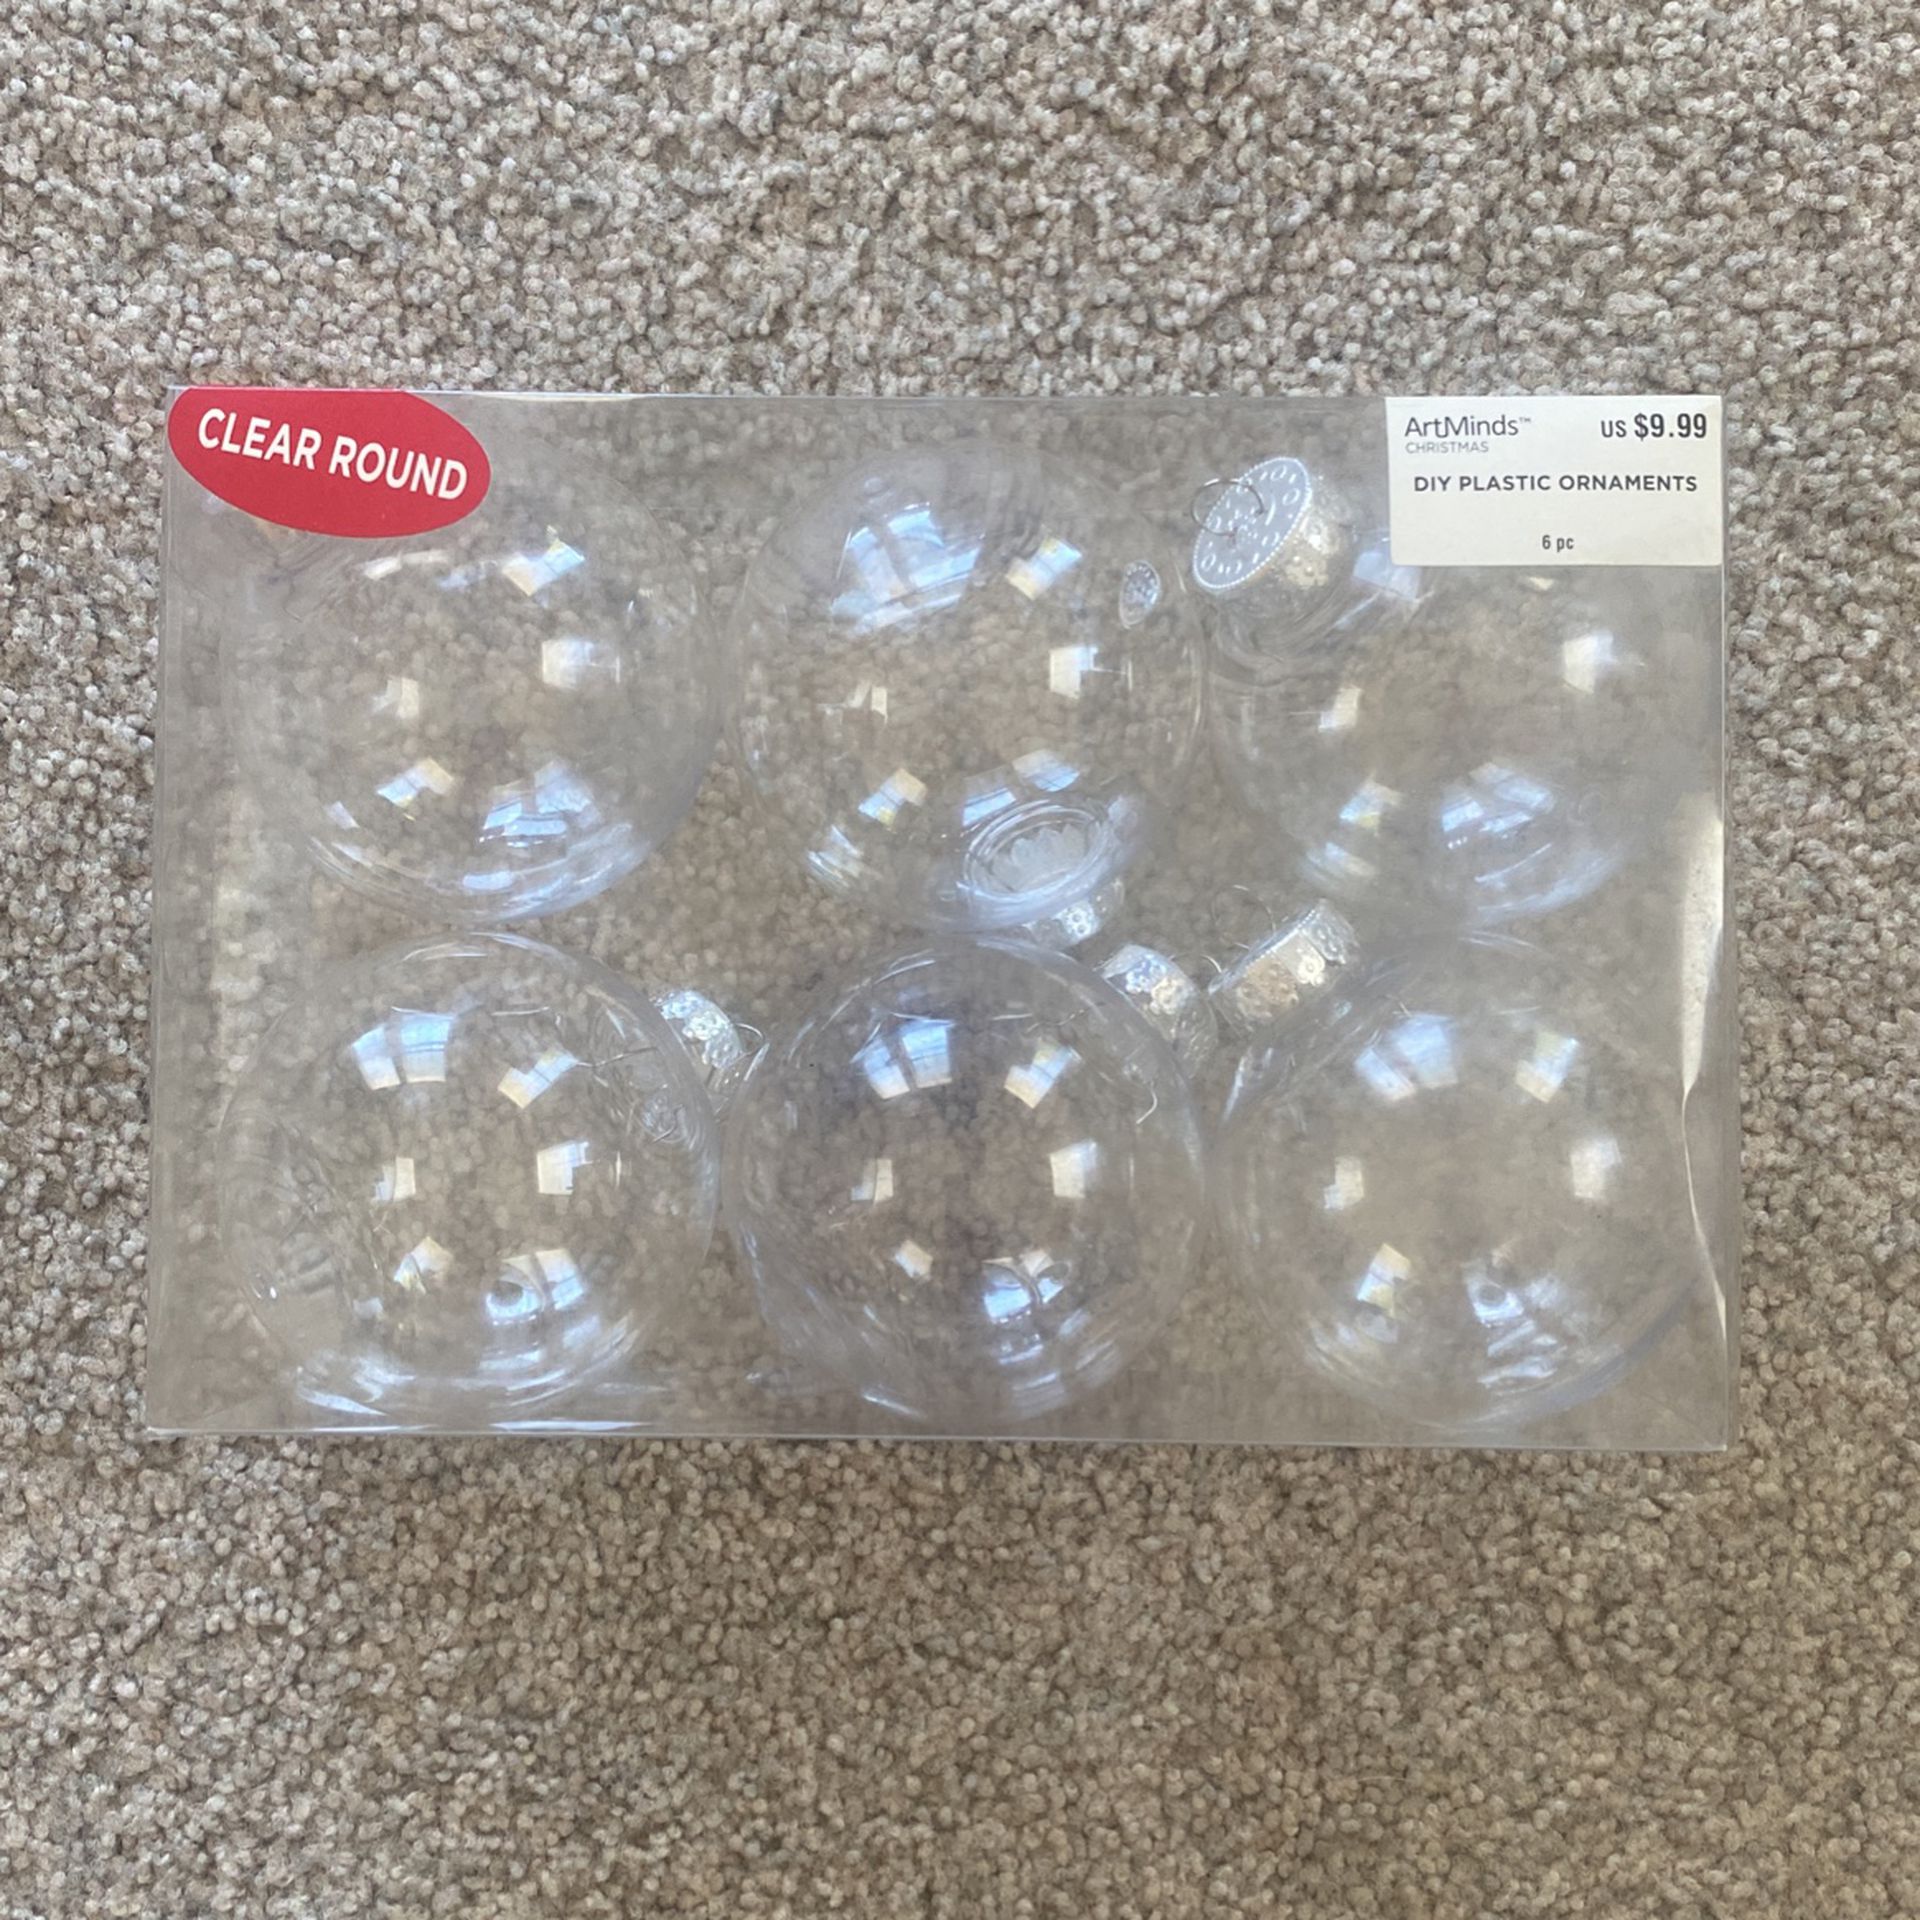 New 6 DIY Clear Round Plastic Ornaments